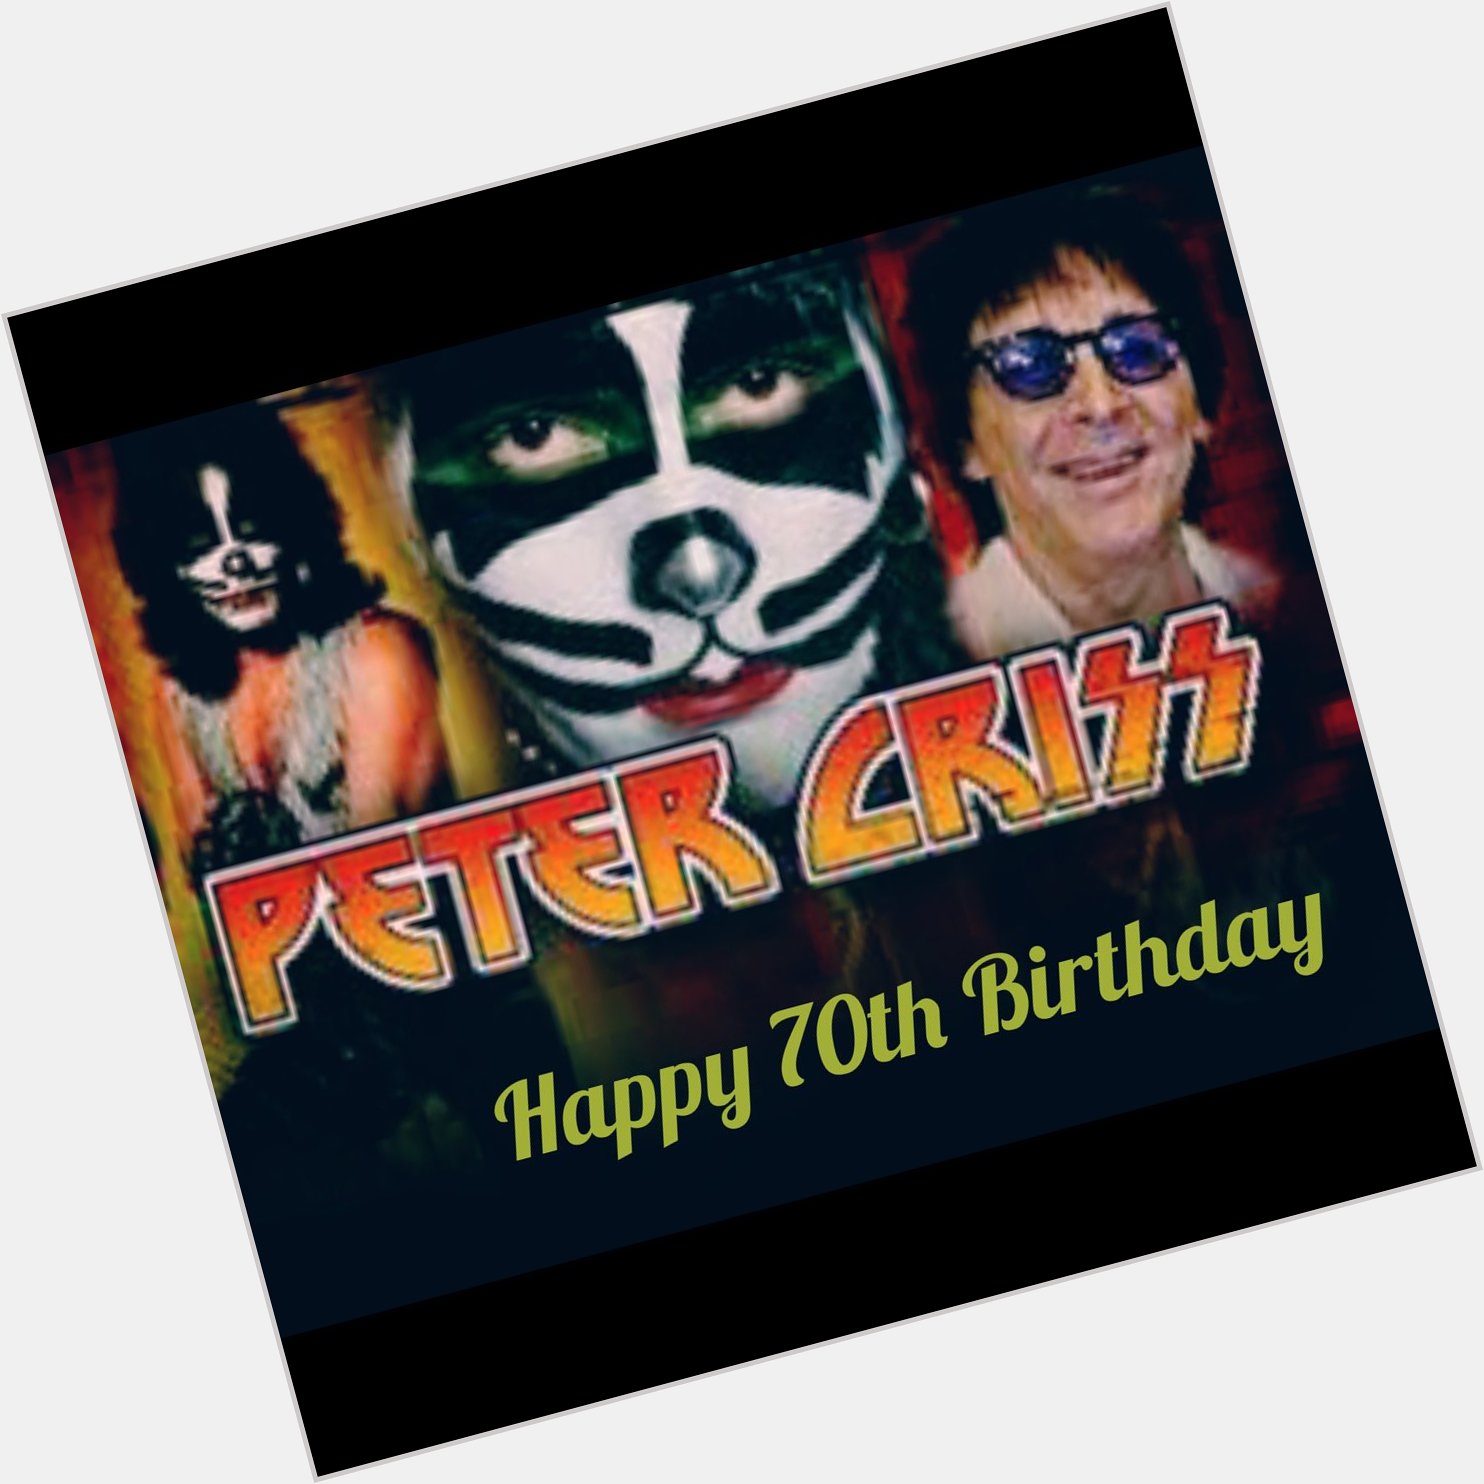 HAPPY 70th BIRTHDAY to the greatest drummer PETER CRISS!        